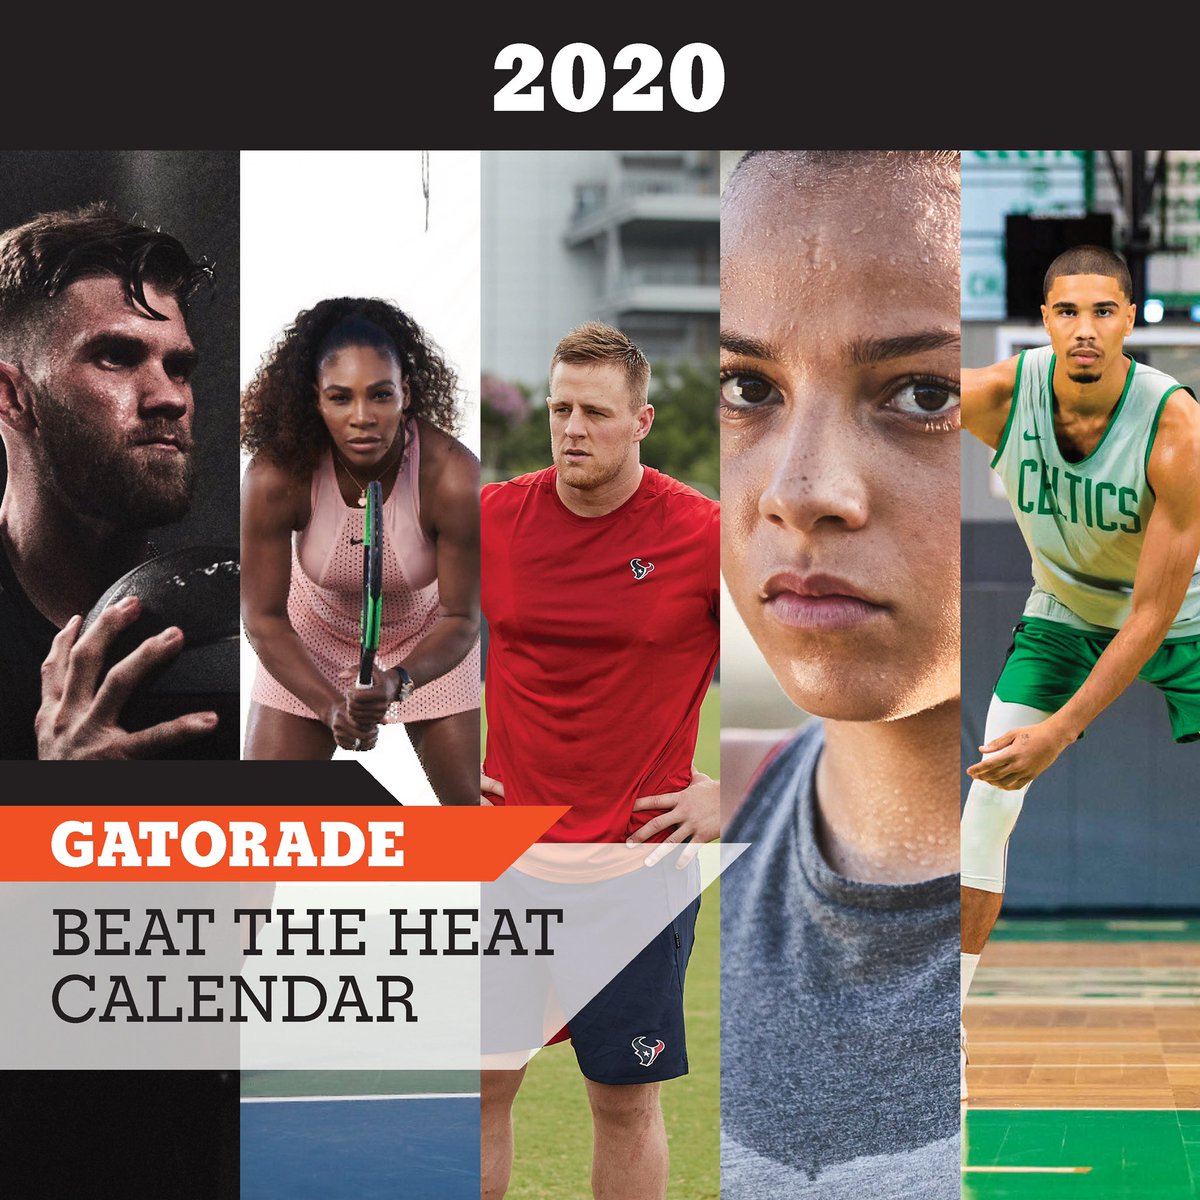 Ticker tape parades don’t just happen, it takes year-round training. Hydrate in all seasons! #BeatTheHeat. @Gatorade #Ad